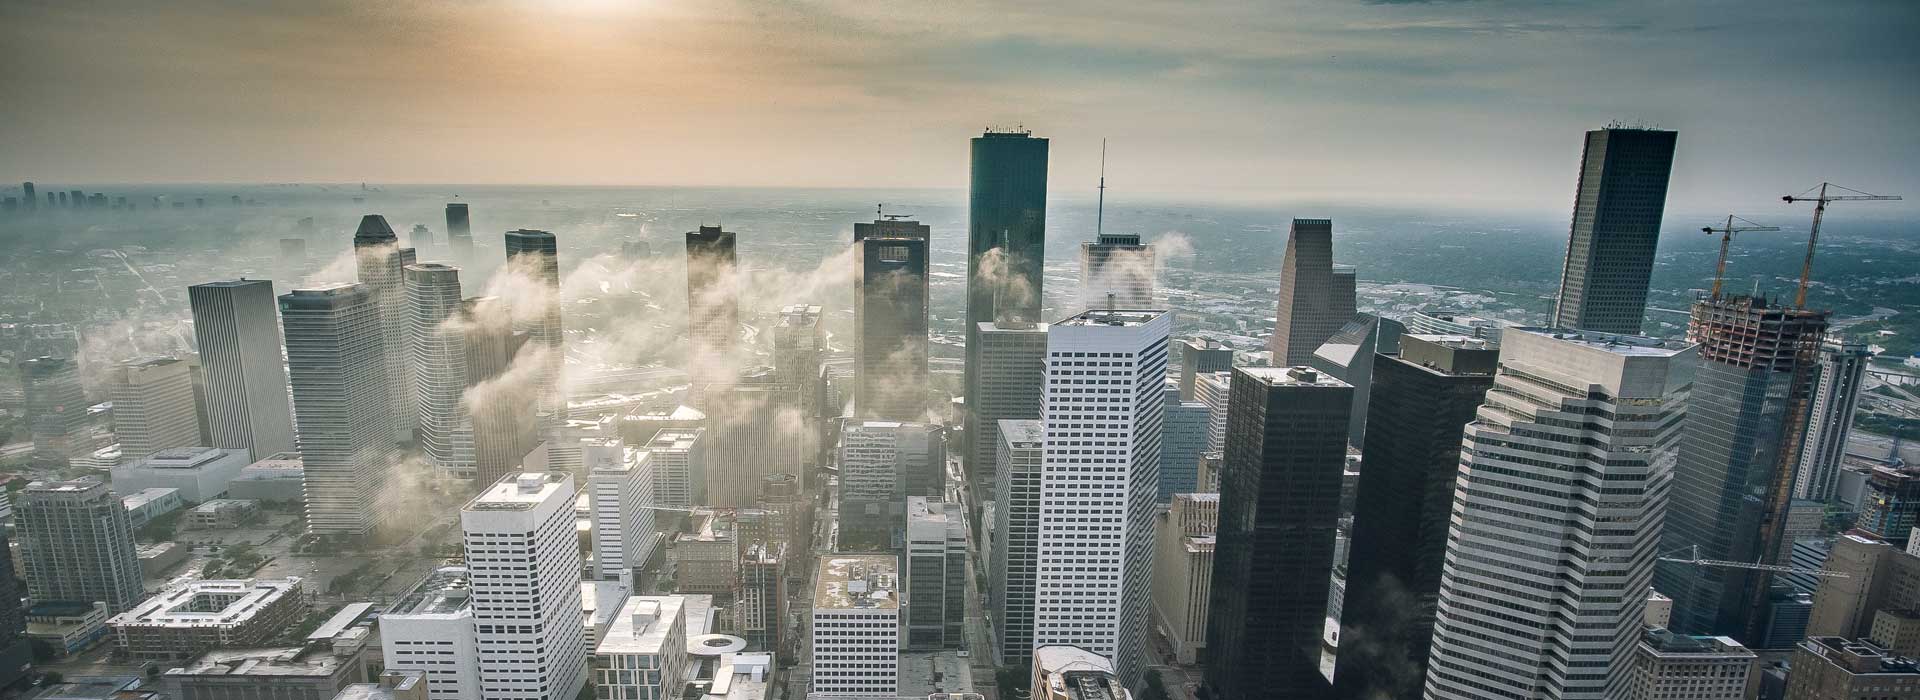 Aerial view of skyscrapers in Houston's downtown core as steam rises from some buildings